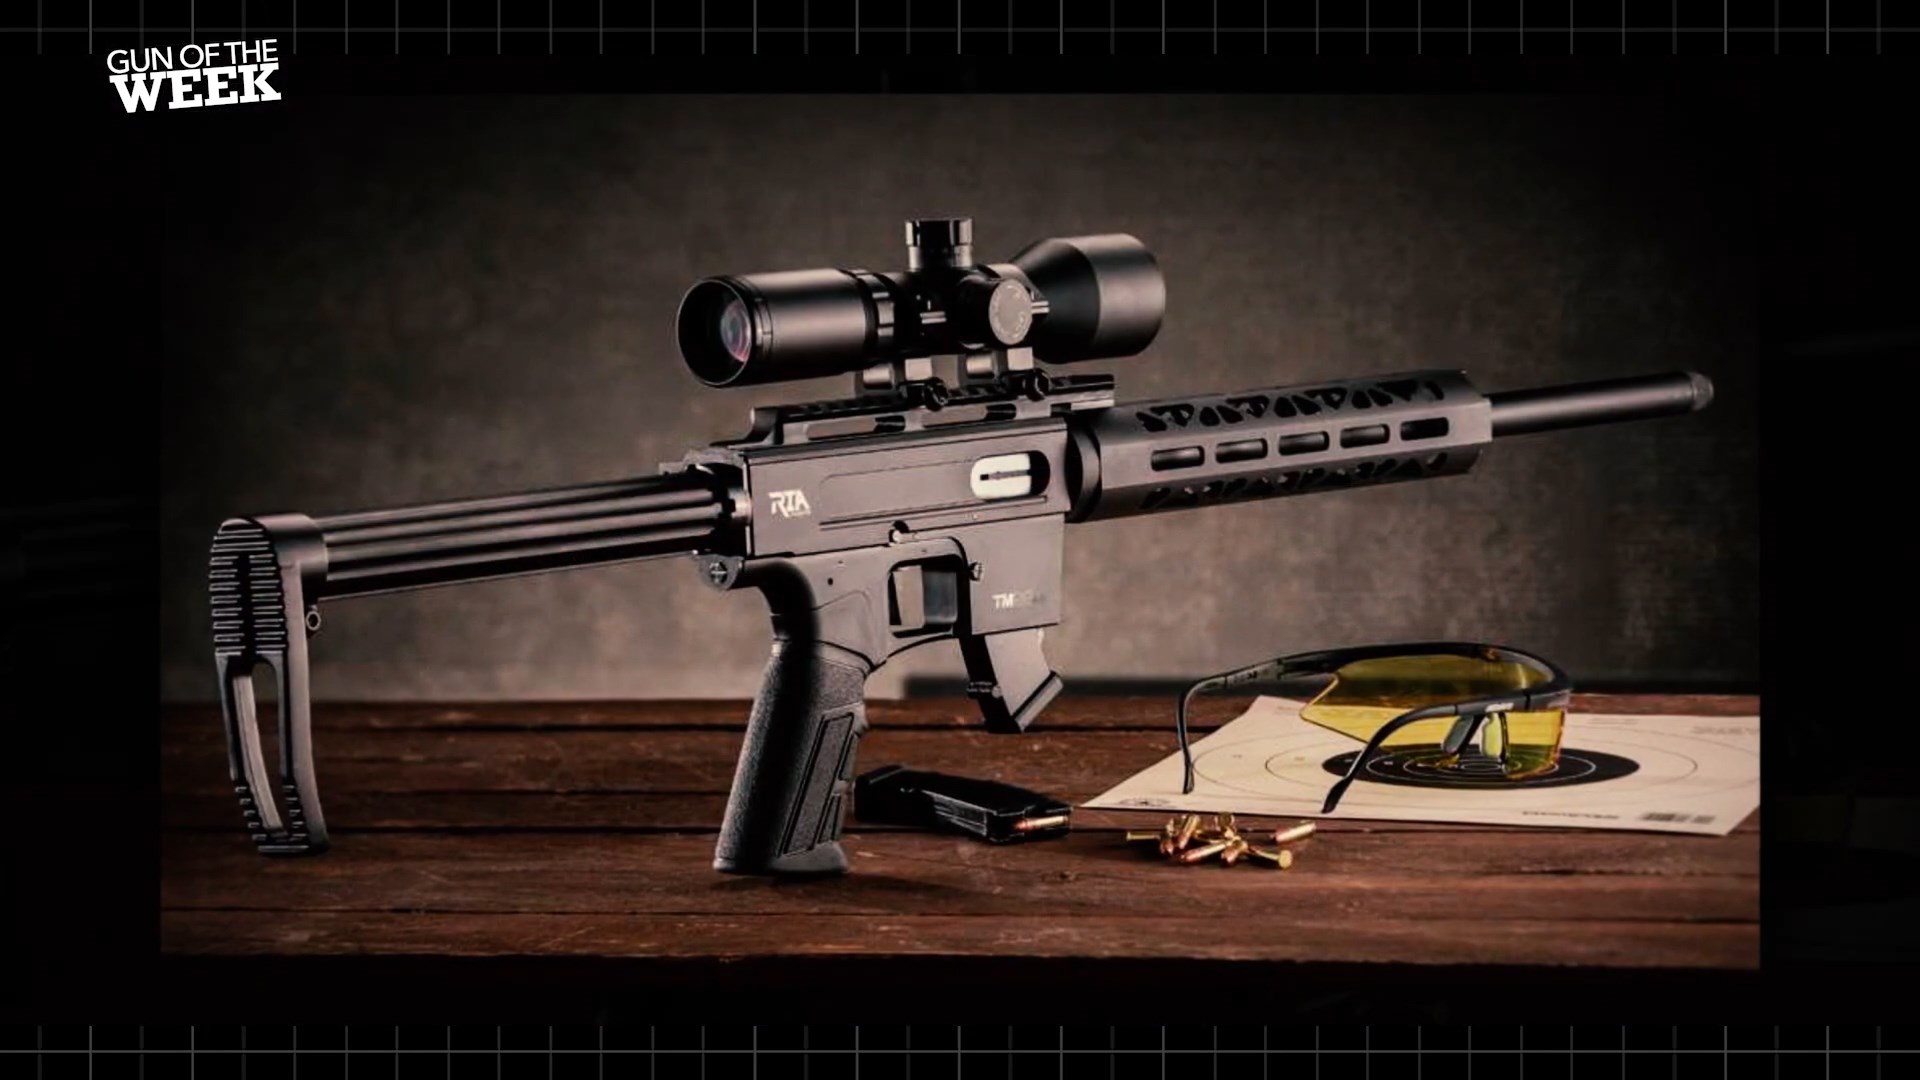 Rock Island Armory TM22 rifle rimfire semi-auto carbine shown on dark table ominous with target shooting glasses and ammunition